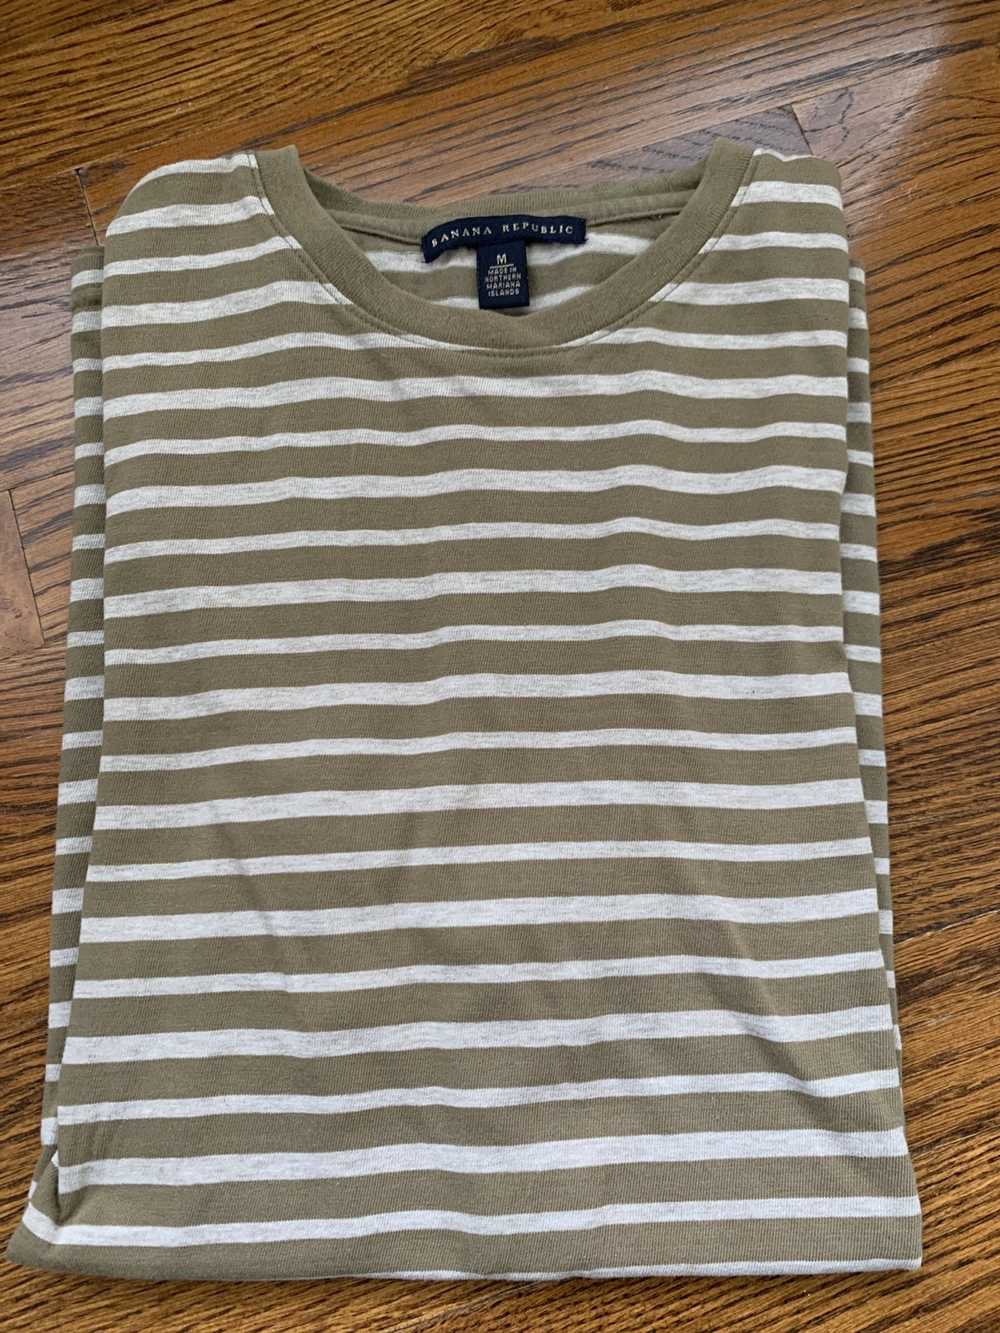 Banana Republic Olive/gray striped T-shirt from BR - image 1